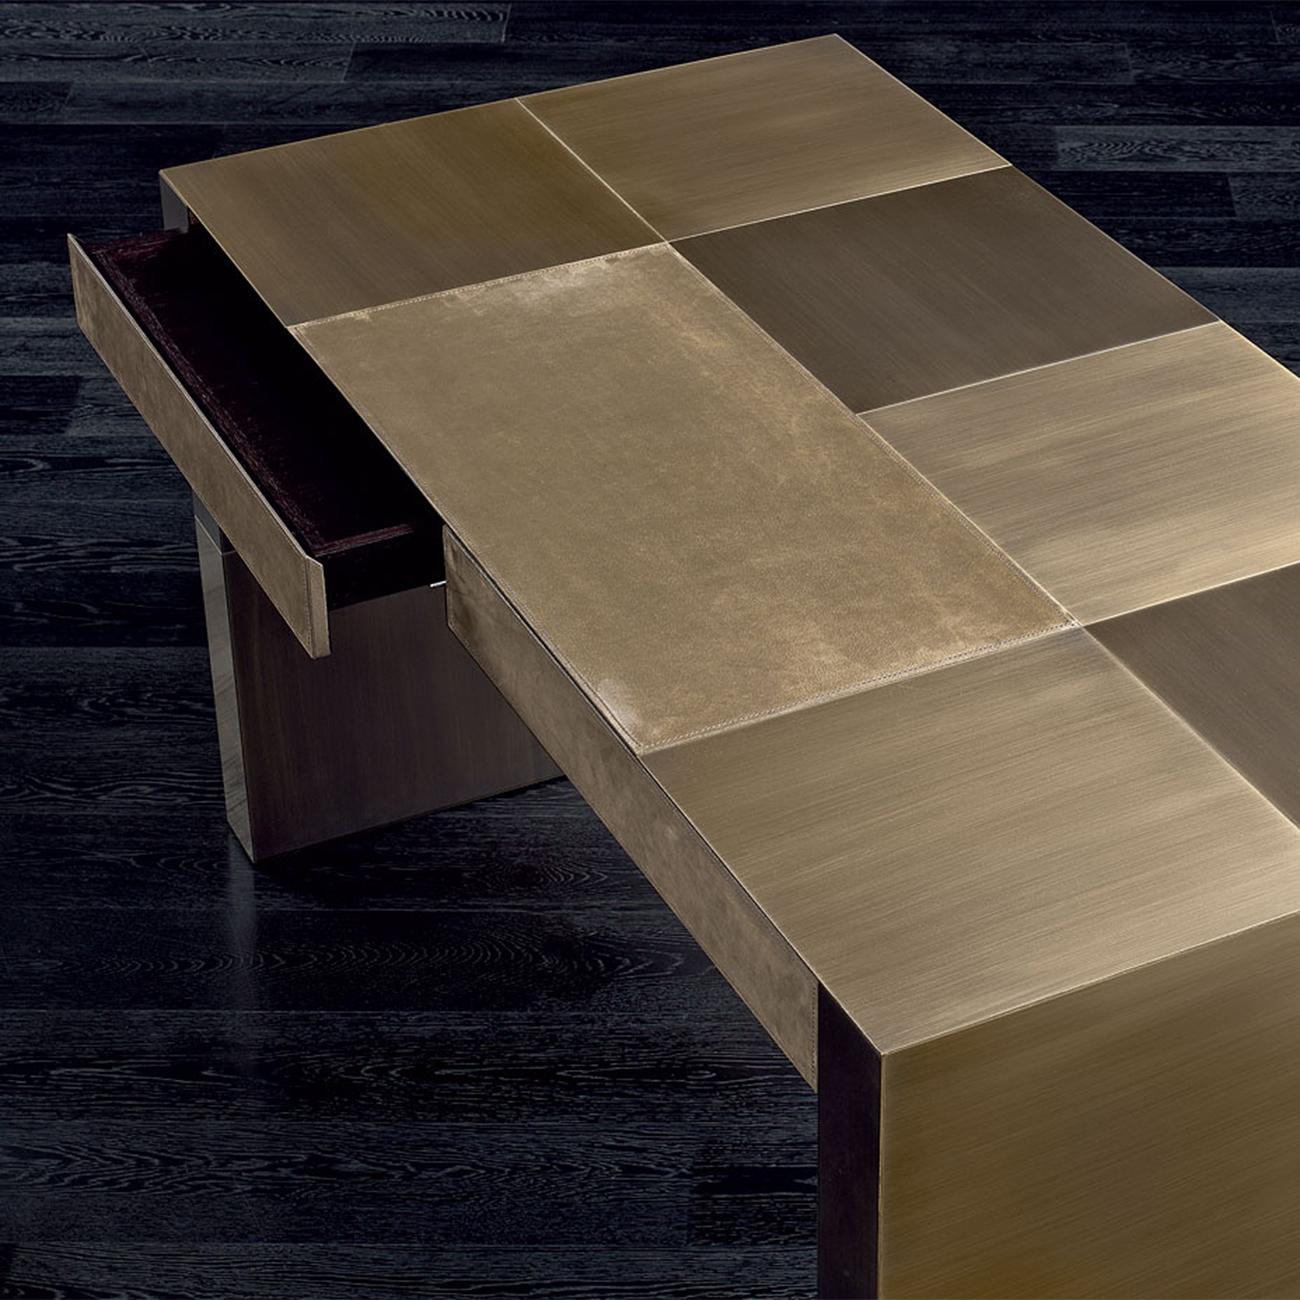 Desk Strada with structure in solid wood covered with
bronze plates in brush finish with 2 different shades of 
brushed bronze finish. Desk pad covered with high quality
genuine suede leather in bronze color finish. Desk including
2 drawers with